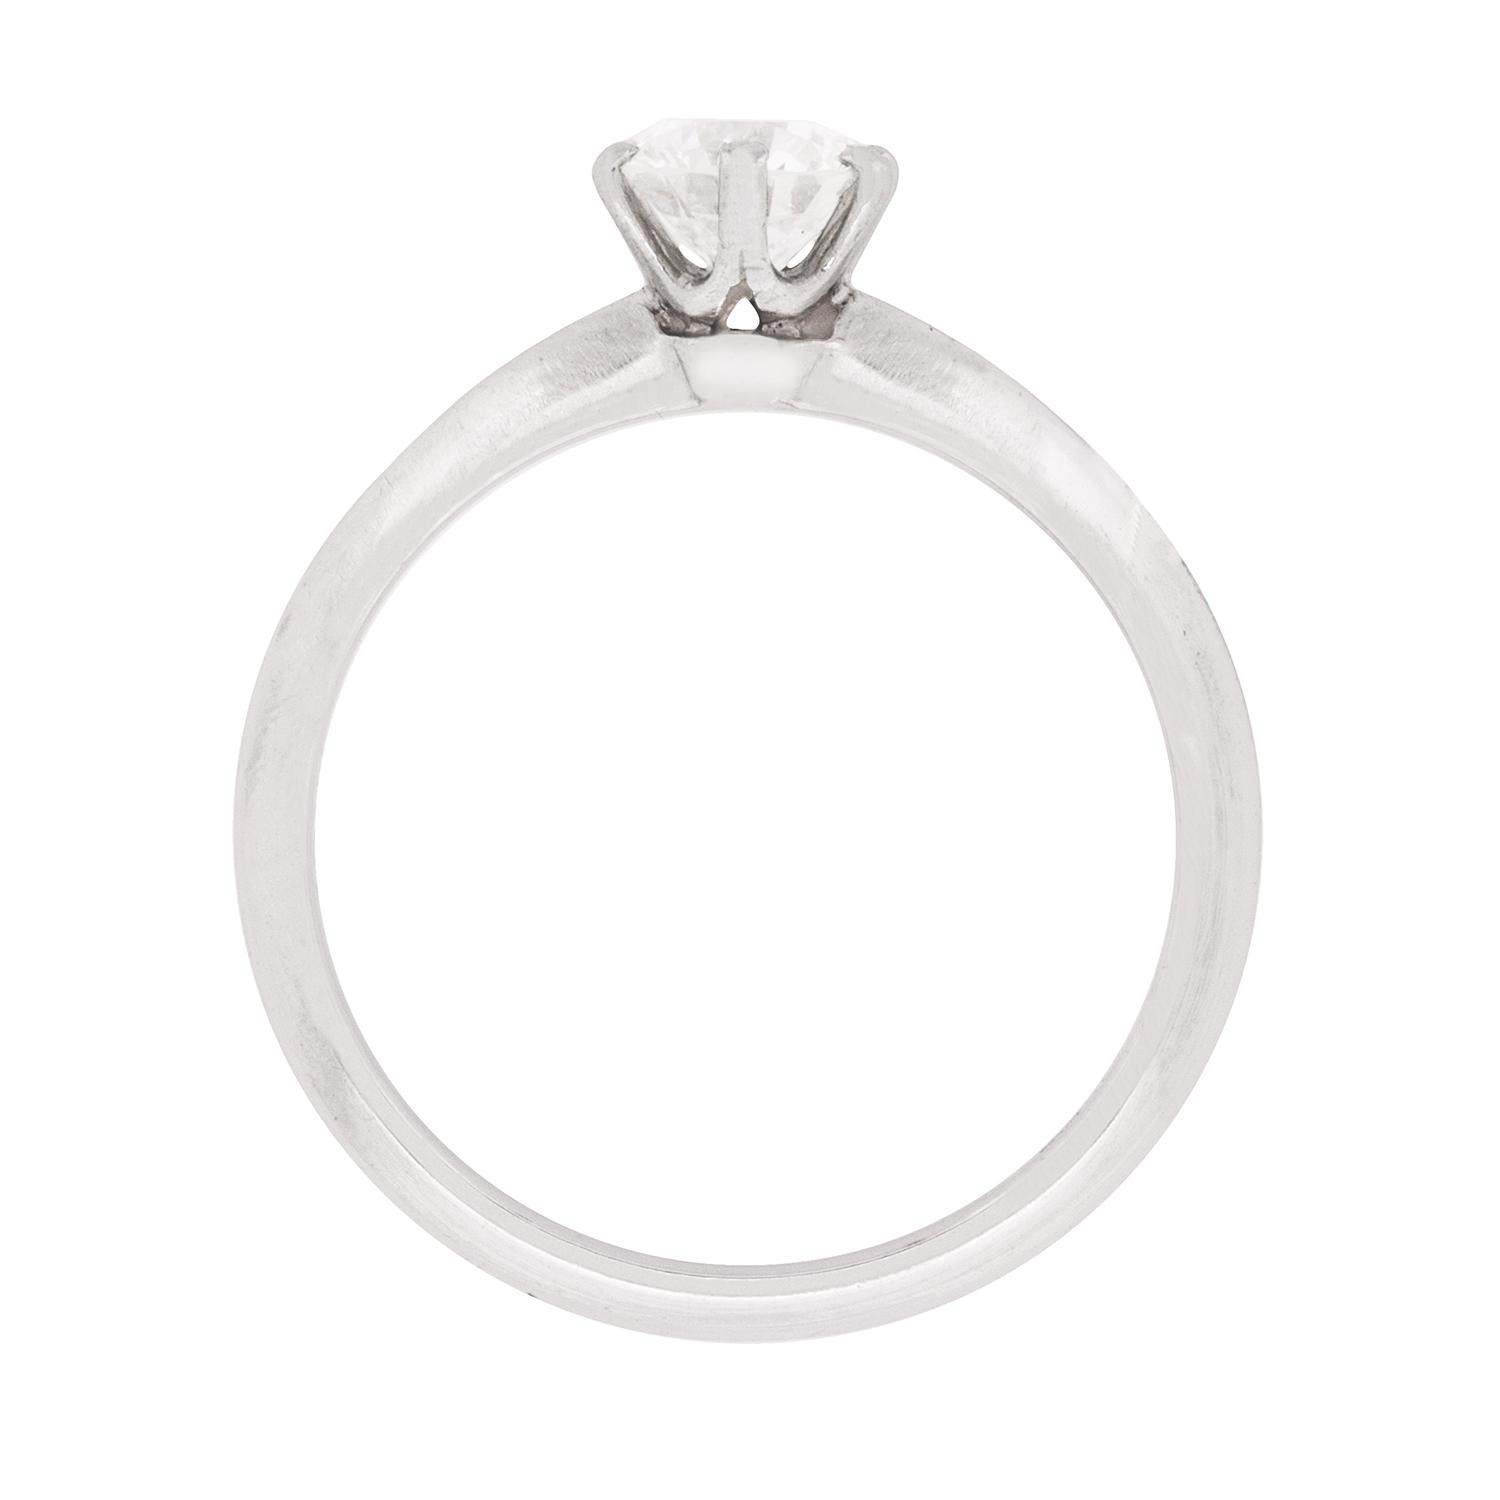 Set within a six claw setting, this stunning Tiffany & Co solitaire ring is classic in every way. It holds a high quality and dazzling diamond. Certified by Tiffany & Co as VS1 in clarity and F in colour, the setting allows the light to reach all